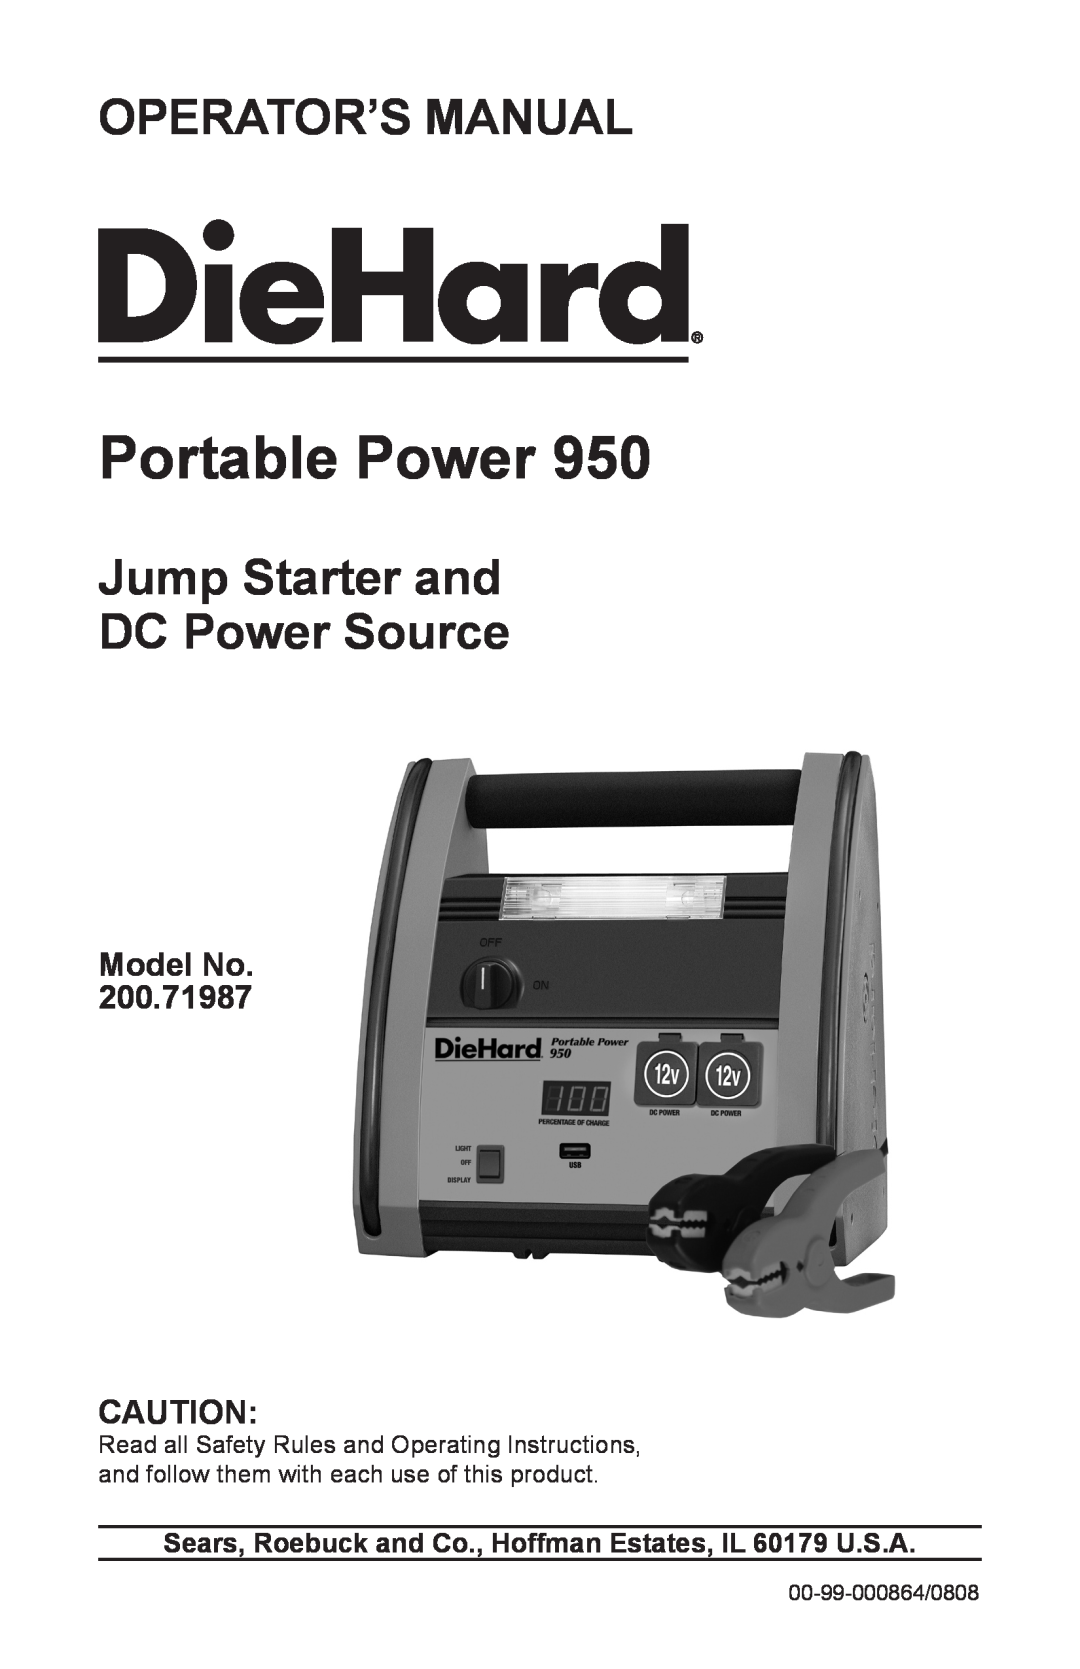 Sears 200.71987 manual Portable Power, Operator’S Manual, Jump Starter and DC Power Source, Model No 